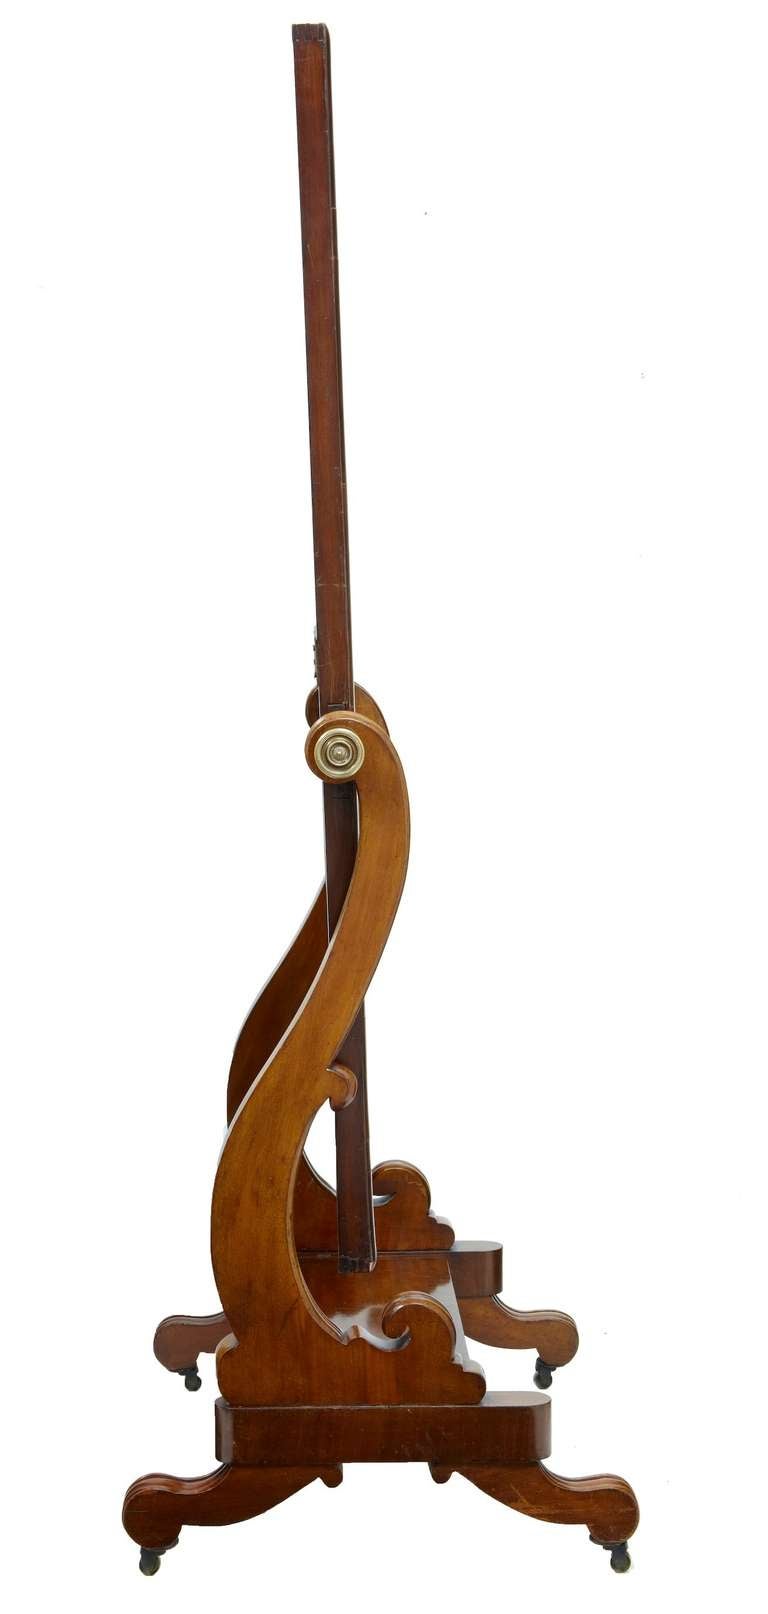 Here we have a tall mahogany cheval mirror in good condition with a quality mirror plate.

Cheval mirrors were so-called because a person could sit on a horse and still view themselves in full regalia. They are easily moved and sculptural in